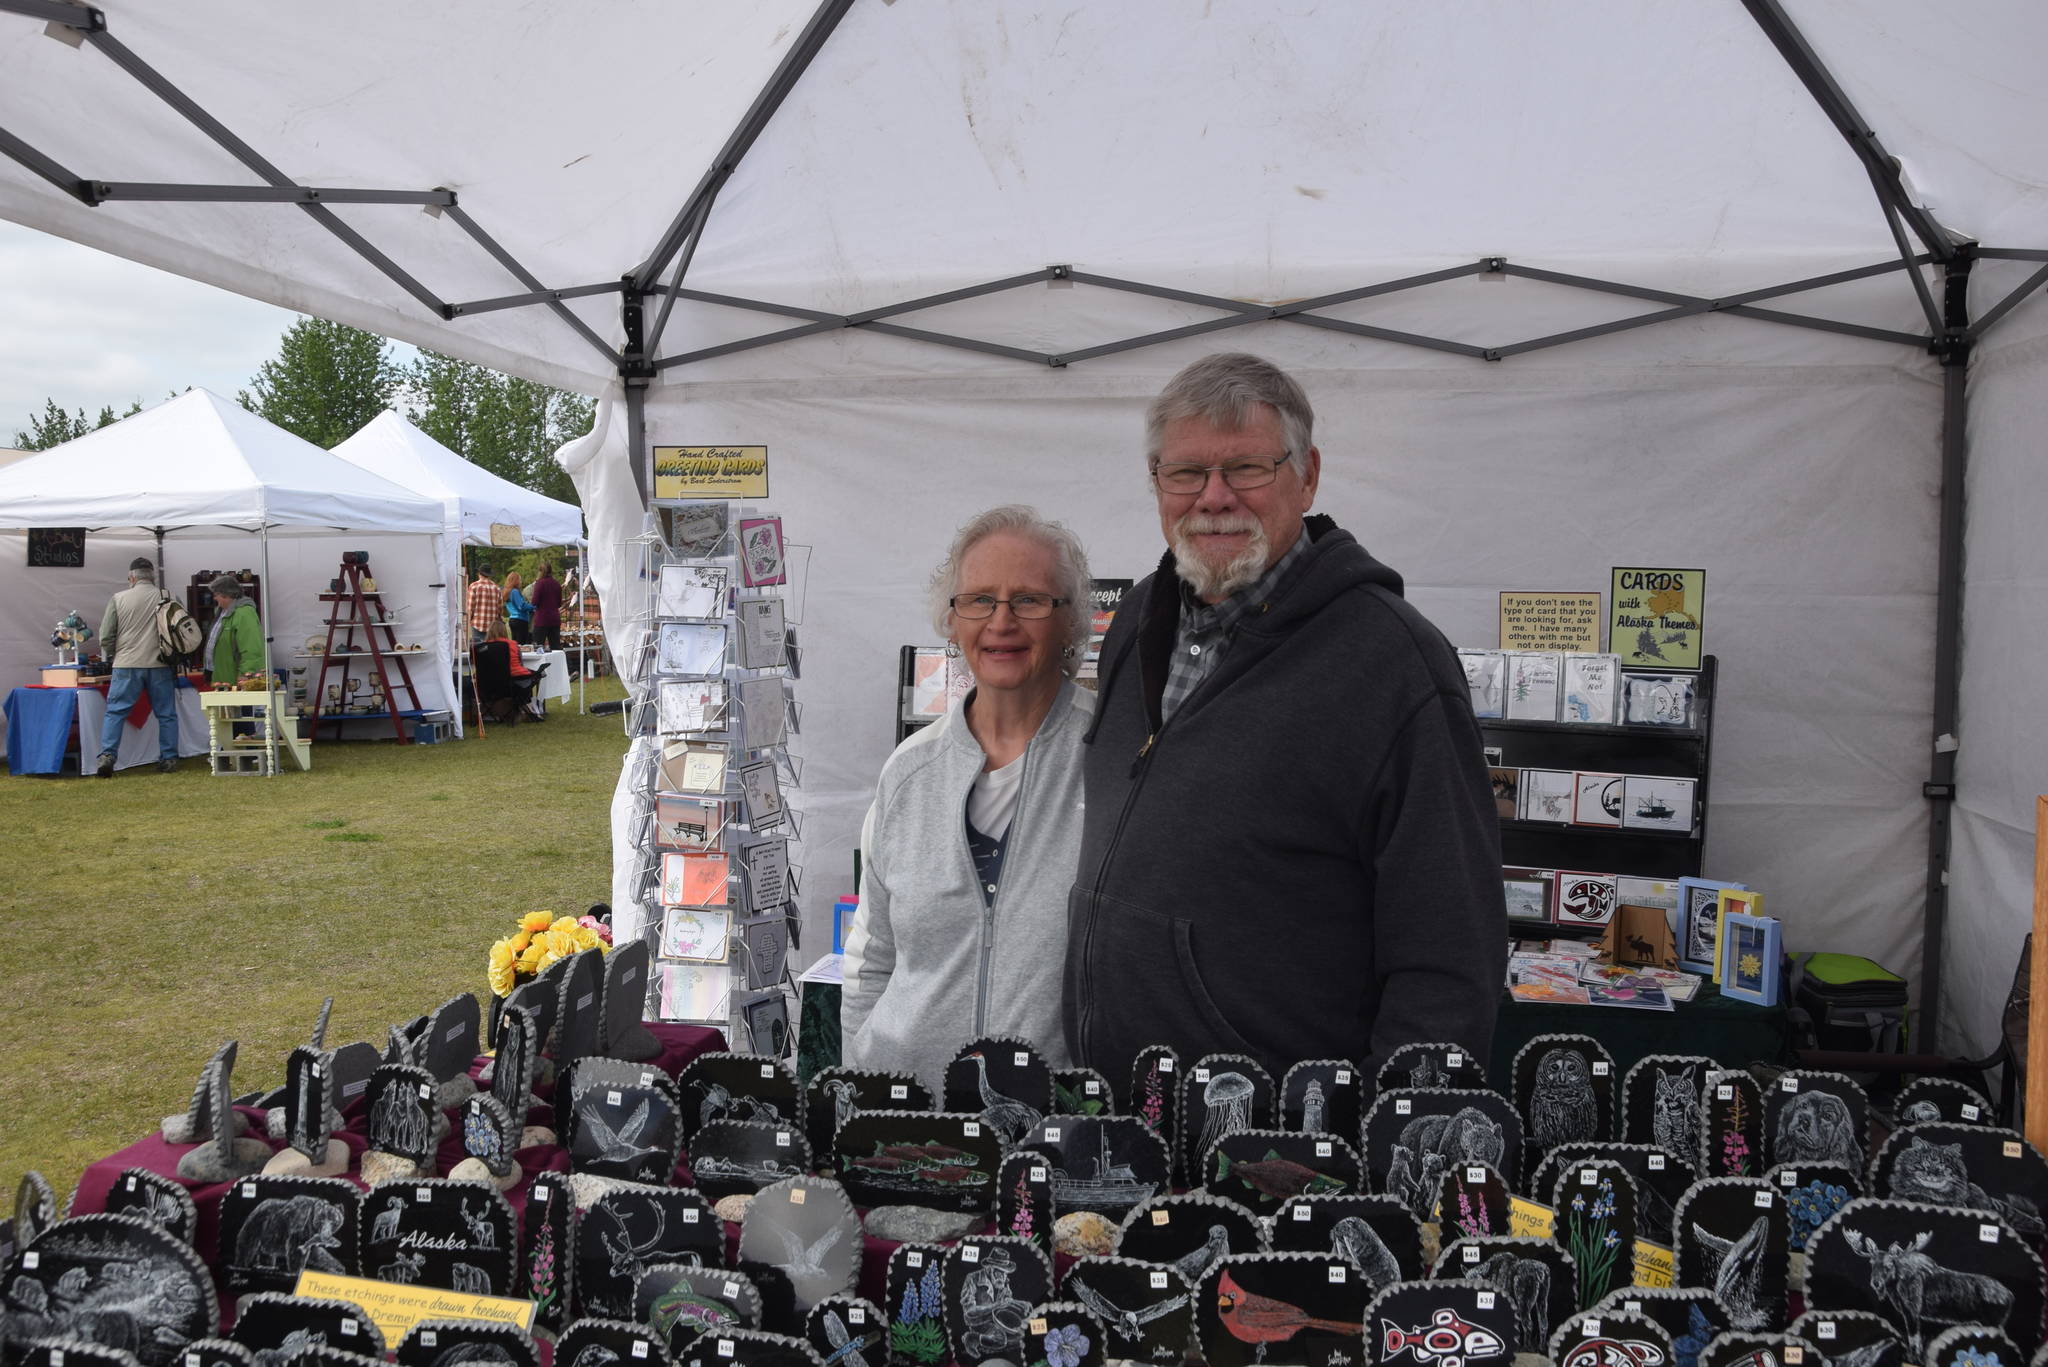 Barb and Don Soderstrom pose in front of their artwork, handmade greeting cards by Barb and etchings in granite by Don, during the Kenai River Festival at Soldotna Creek Park in Soldotna, Alaska on June 8, 2019. (Photo by Brian Mazurek/Peninsula Clarion)